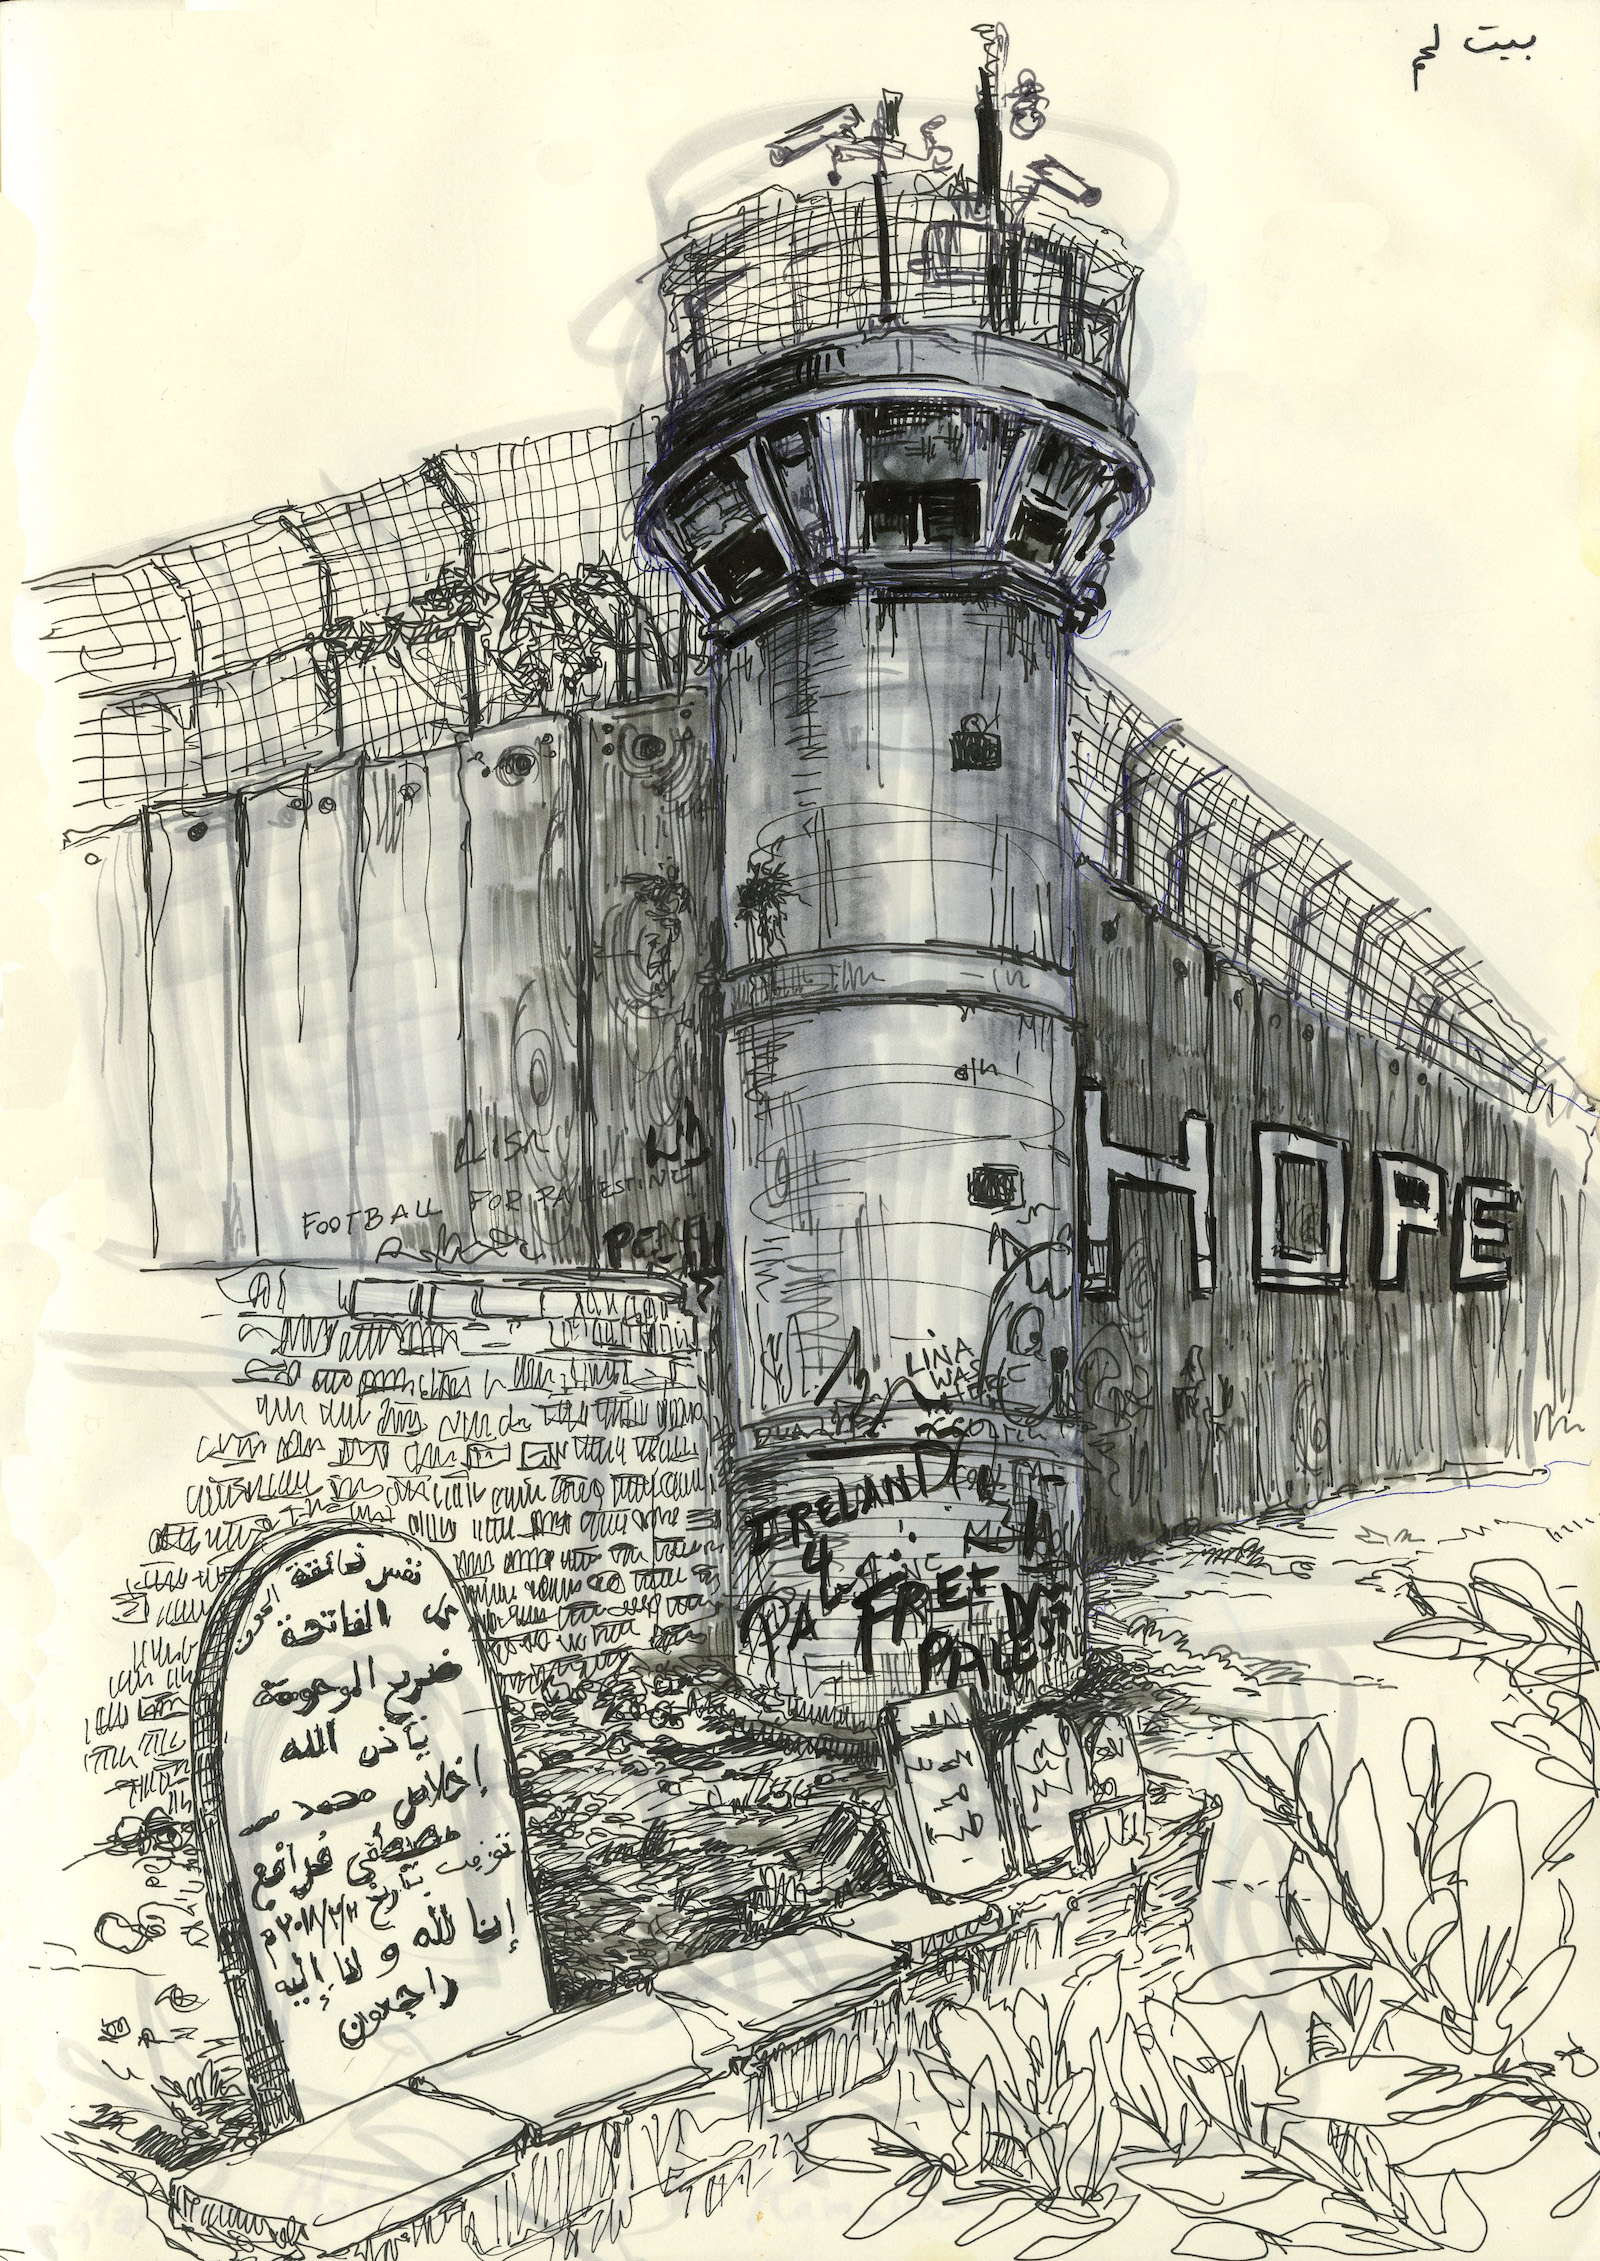 Drawing of a section of the West Bank Wall with a security tower, overlooking a cemetery with gravestones for Palestinian refugees